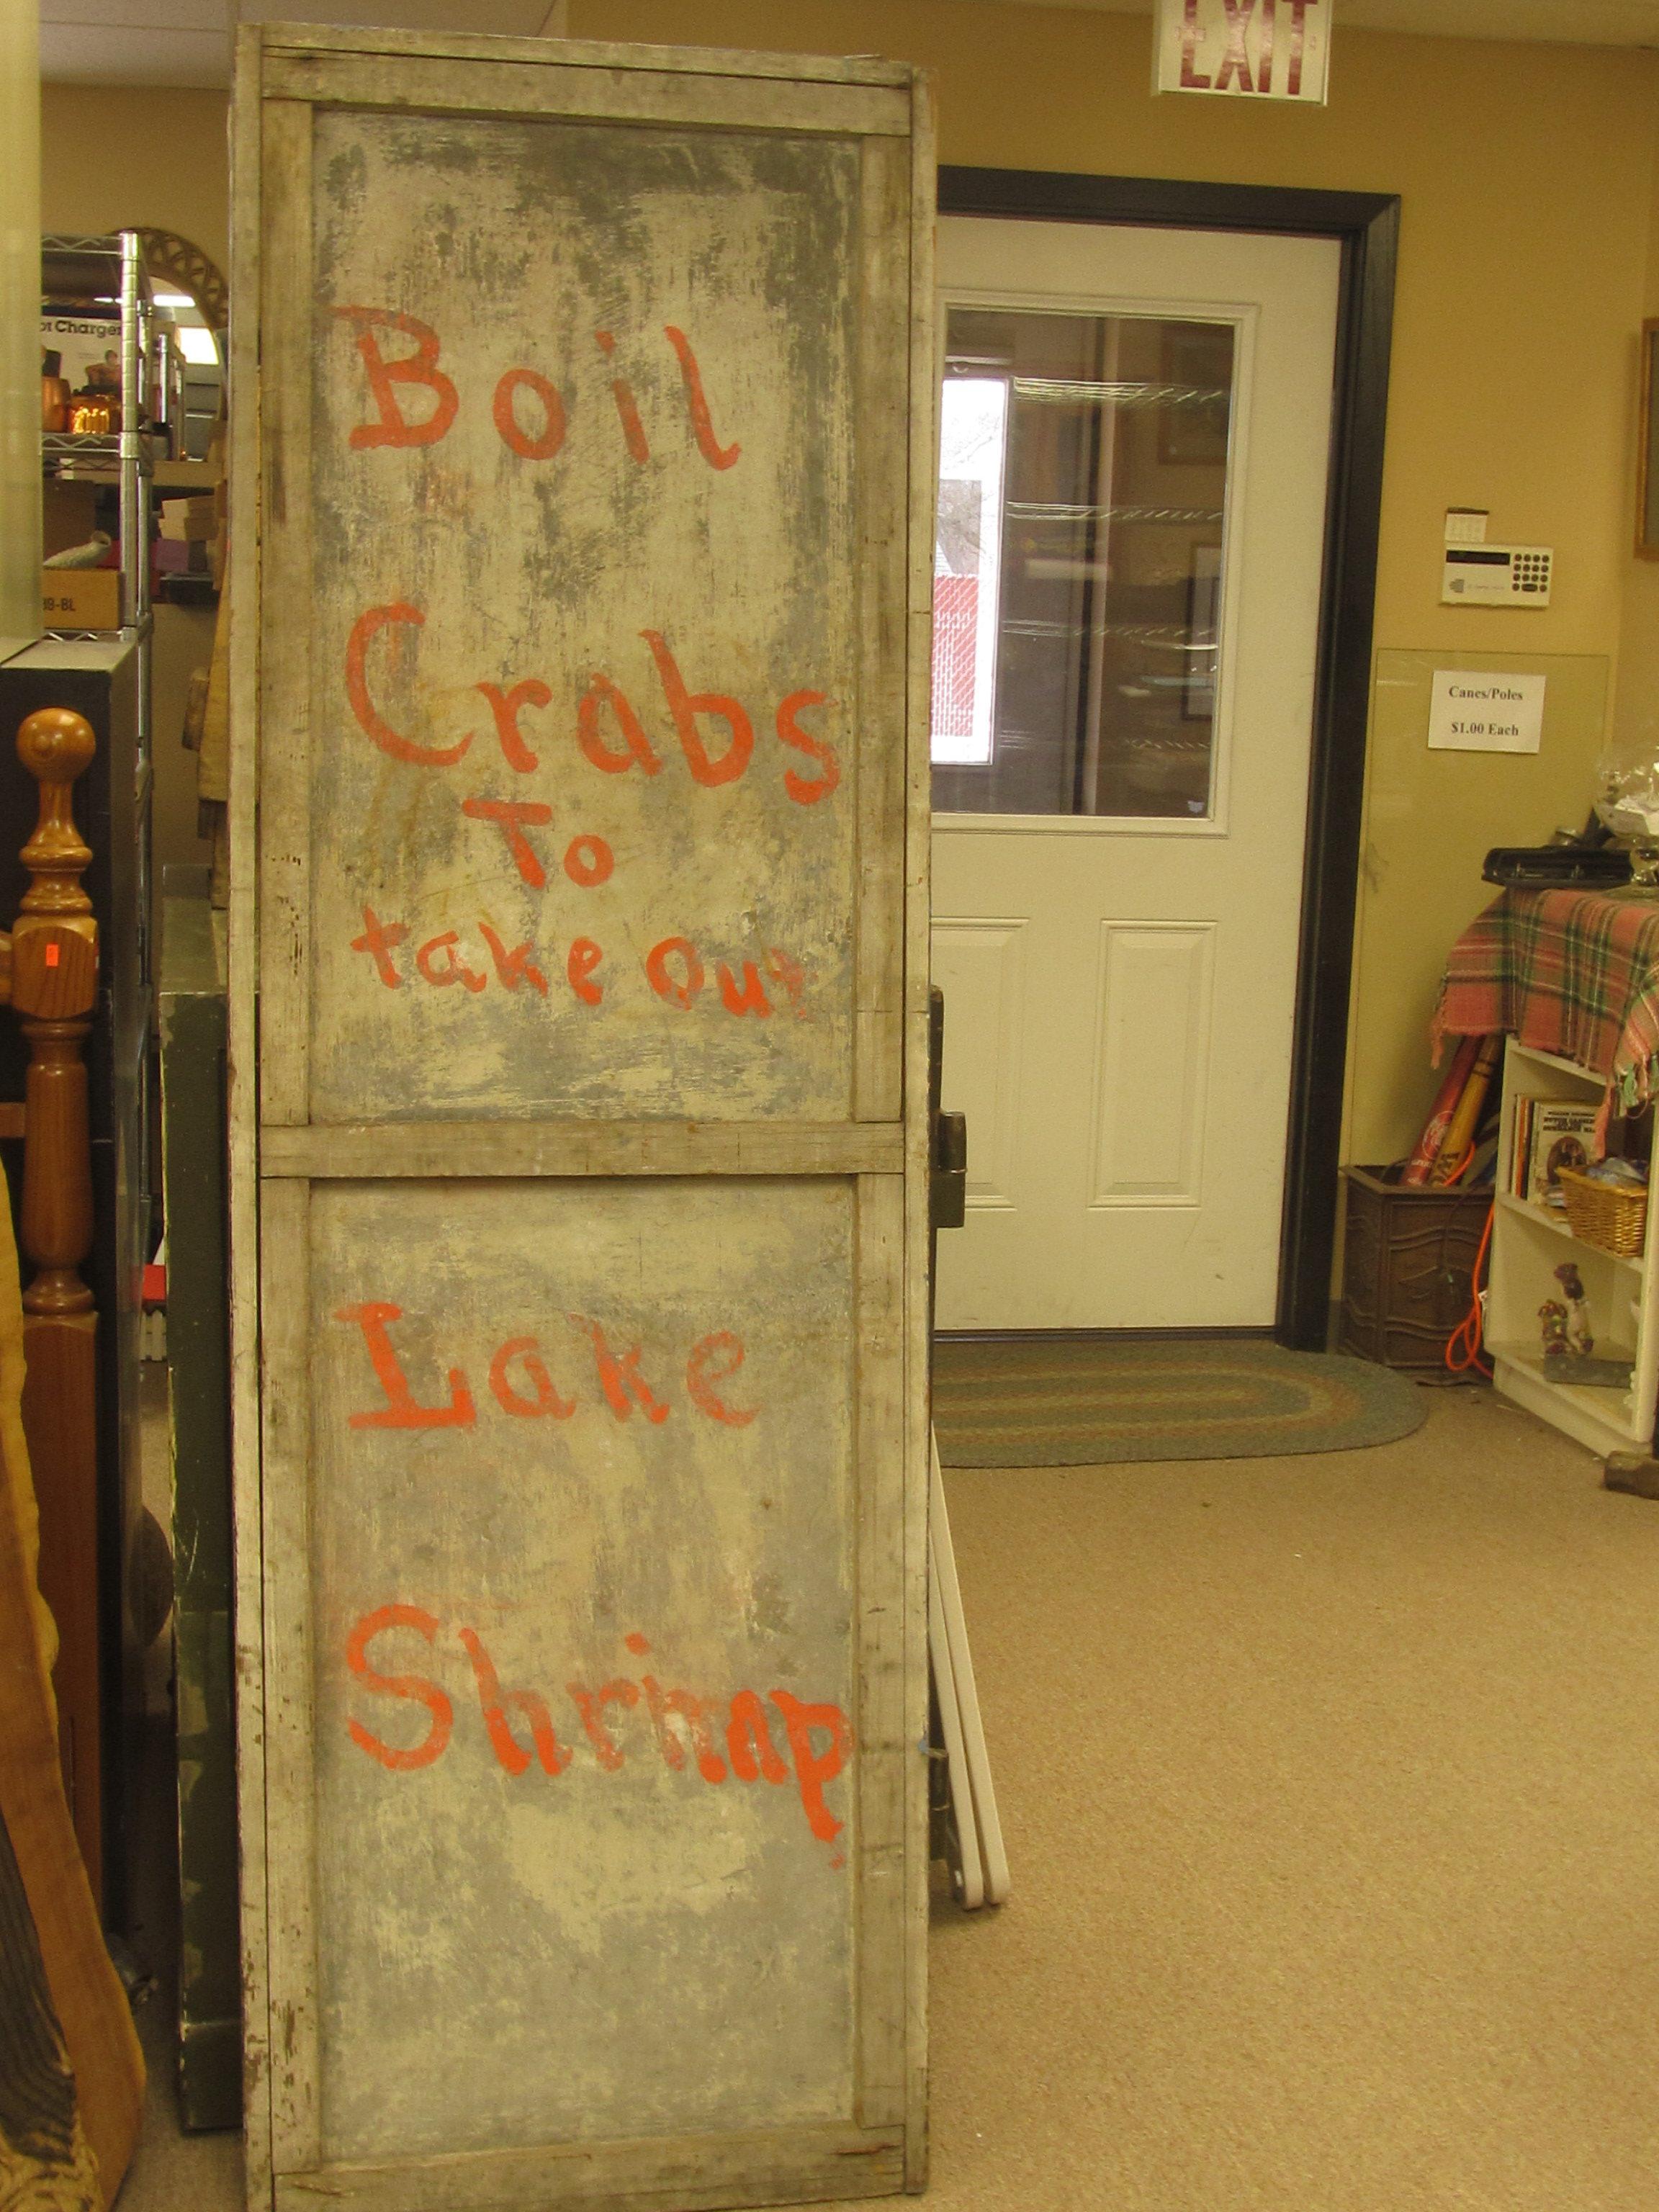 Huge Framed Metal Sign: 6 Ft 2” Tall x 2 Ft Wide “ 1123-1125 Monger's Electric Appliances & Repair S